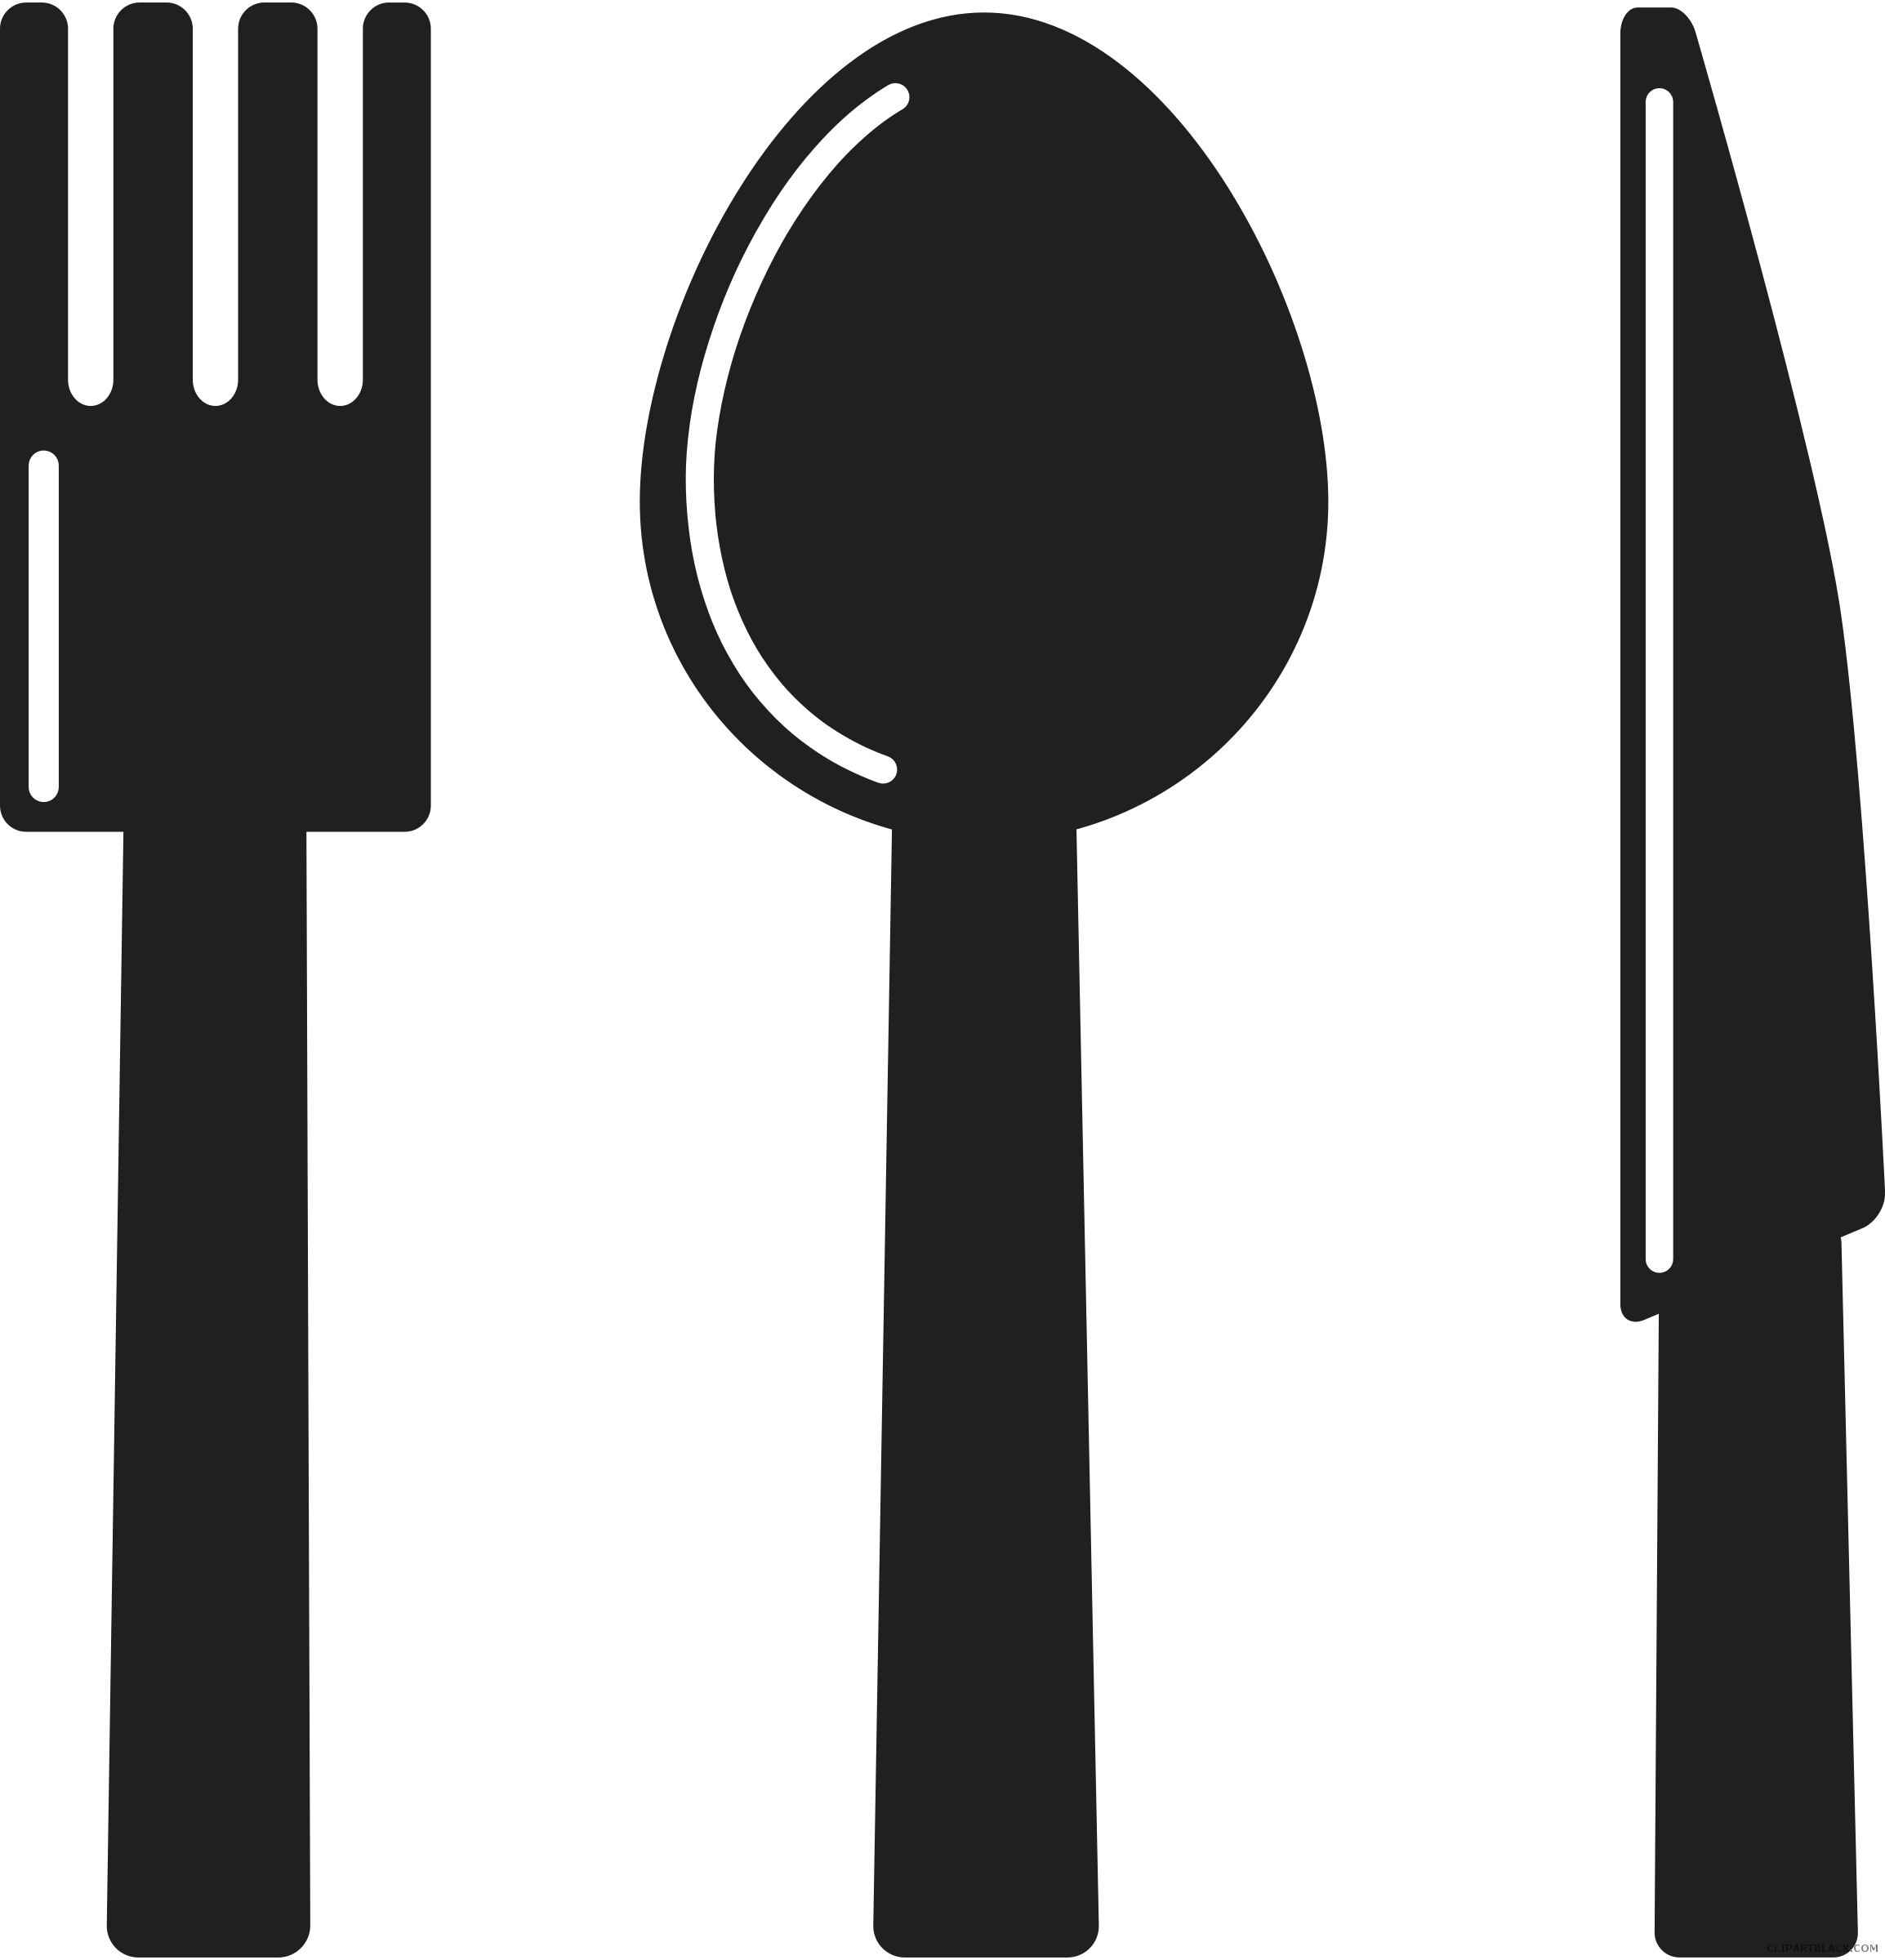 Fork Knife And Spoon Tools Free Black White Clipart - Spoon & Fork Clip Art (2308x2400)